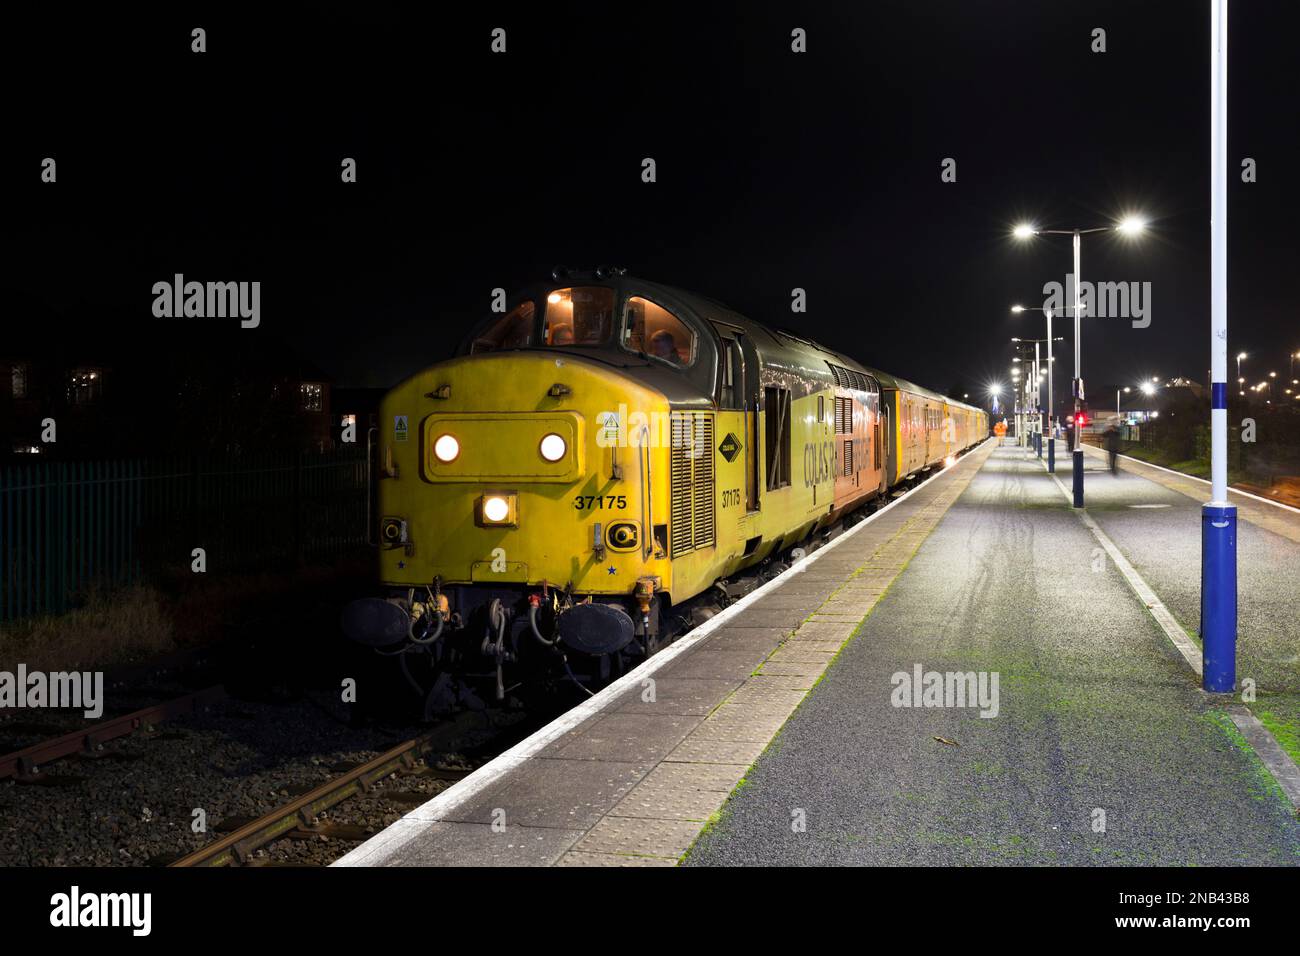 Colas Rail Freight class 37 diesel locomotive at Morecambe  with the Network Rail plain line pattern recognition infrastructure monitoring train Stock Photo